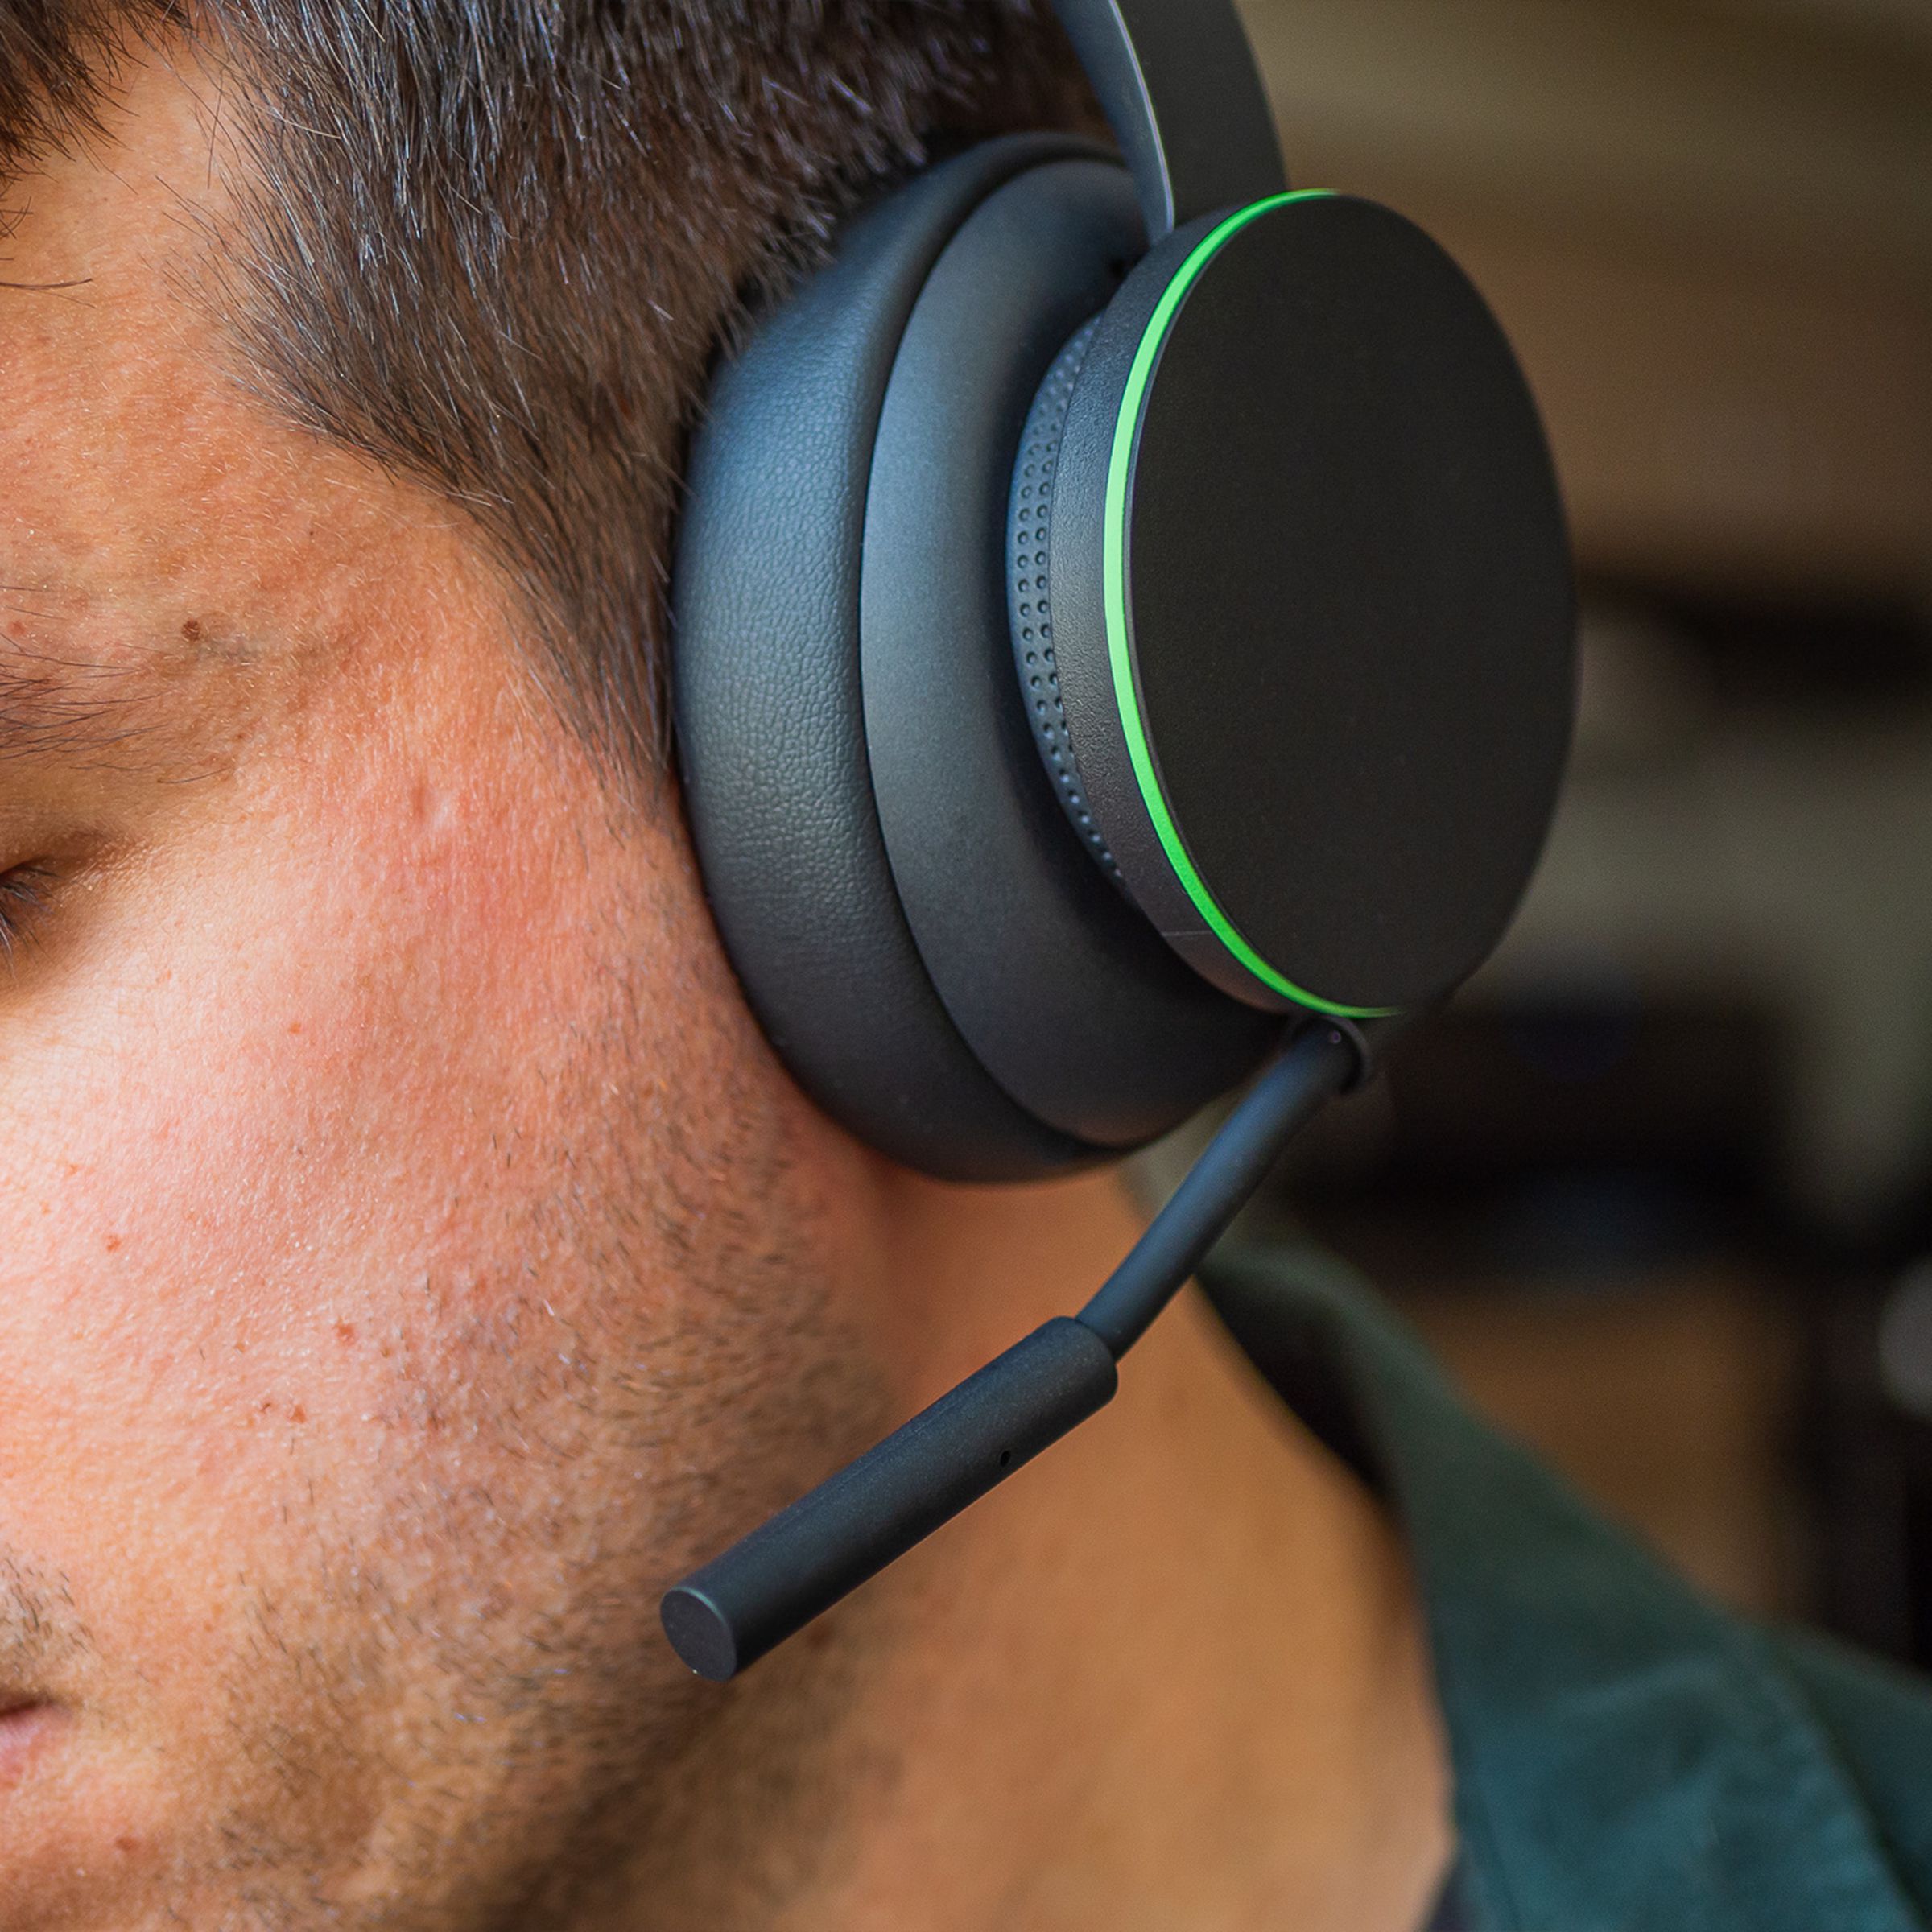 A close-up image of a male wearing the Xbox Wireless Headset.